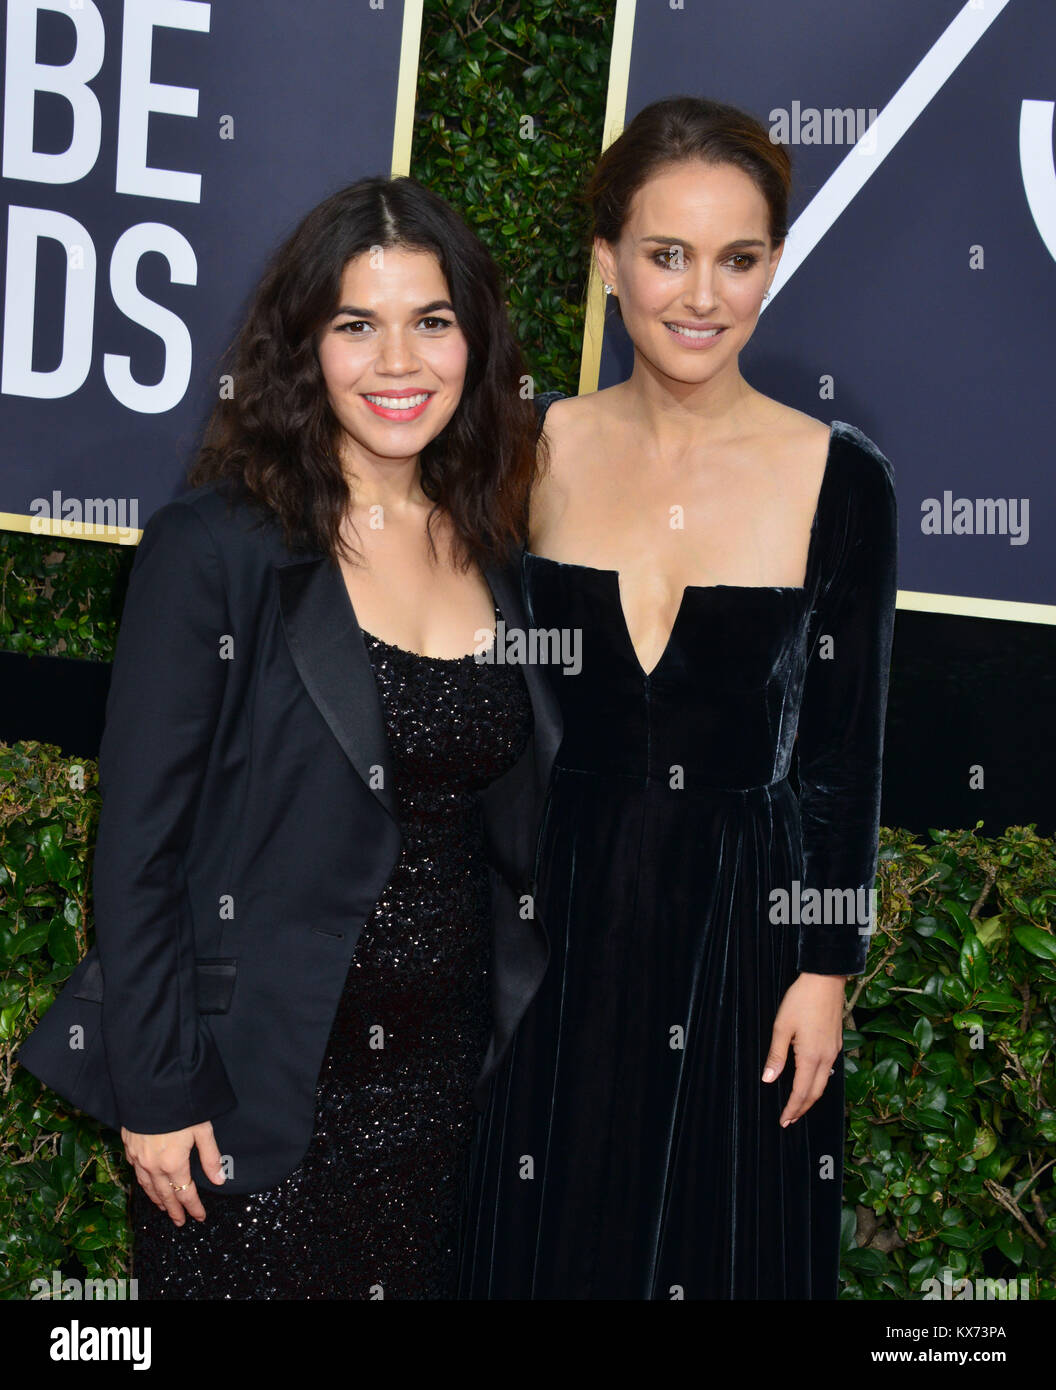 Beverly Hills, California, USA. 07th Jan, 2018. America Ferrera, Nathalie Portman 081 attends the 75th Annual Golden Globe Awards ceremony at the Beverly Hilton Hotel in Beverly Hills. CA. January the 2018 Credit: Tsuni / USA/Alamy Live News Stock Photo